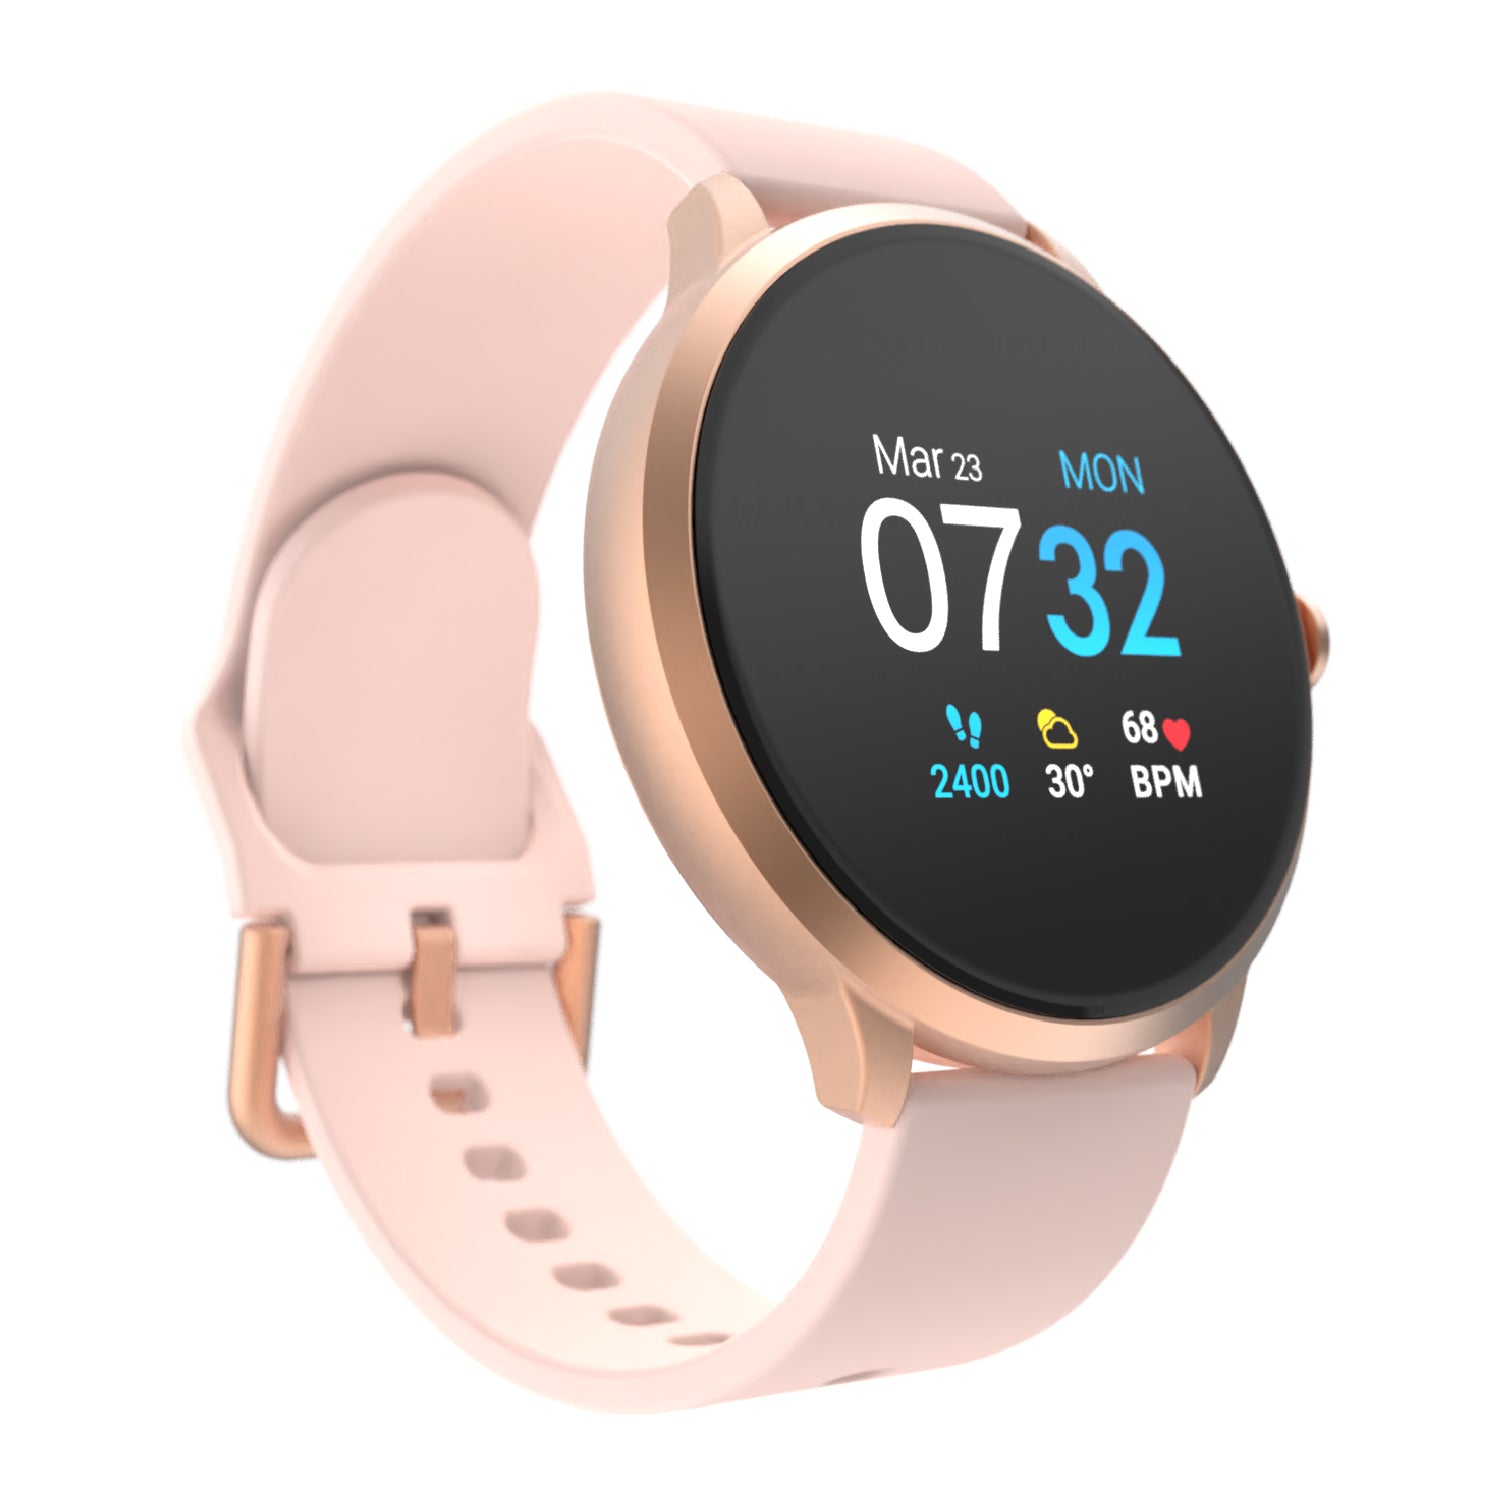 iTouch Sport 3 Smartwatch in Rose Gold with Blush Strap